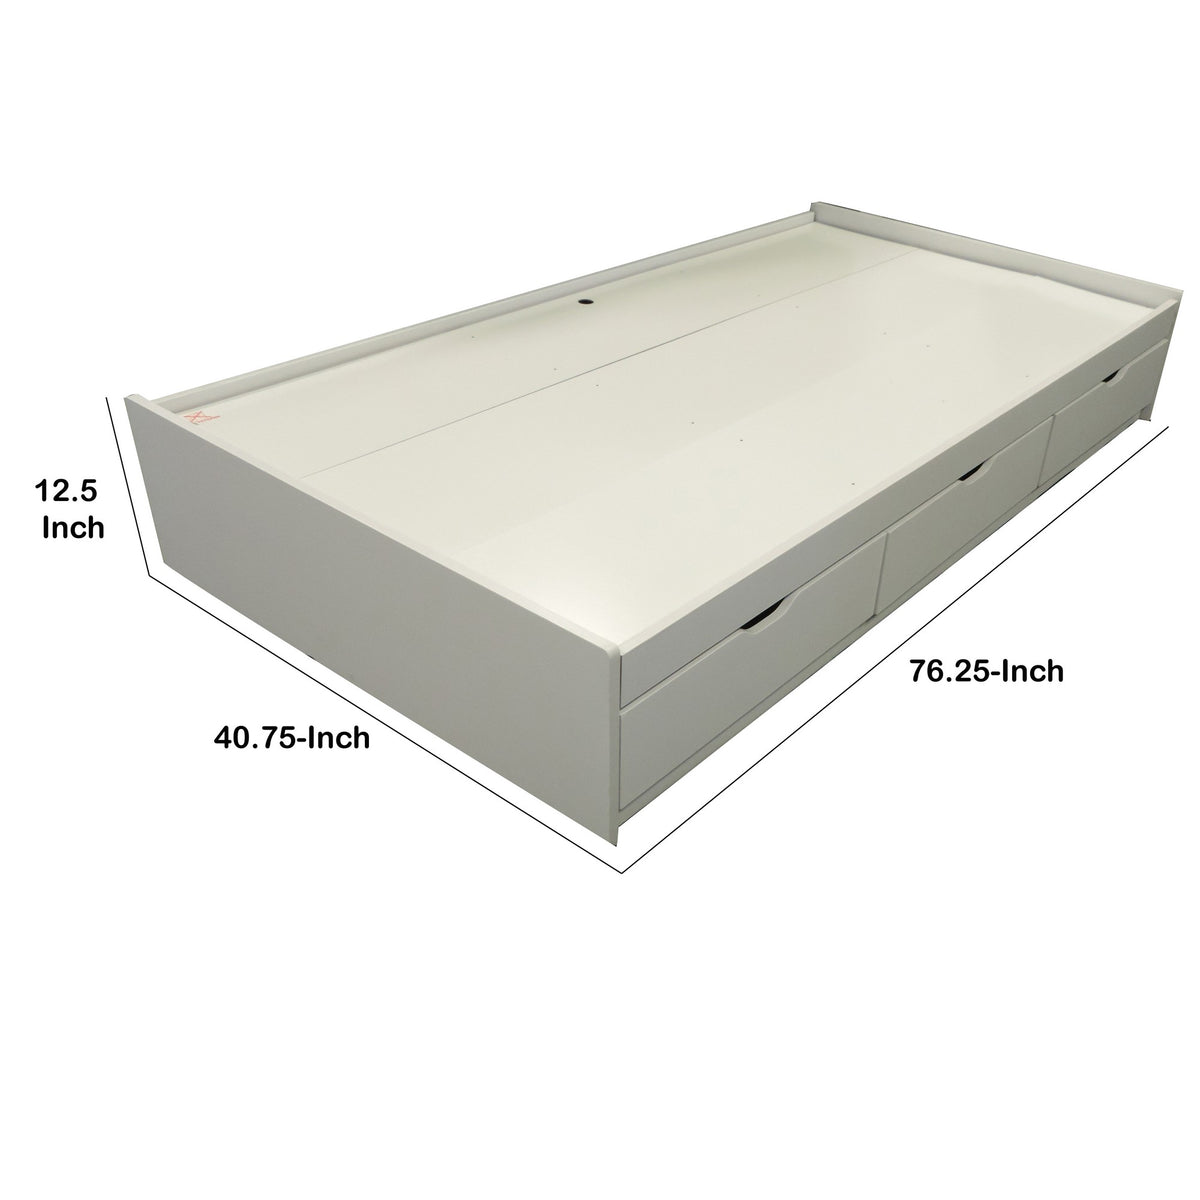 Contemporary Style Wooden Frame Twin Size Chest Bed with 3 Drawers, White - BM141870